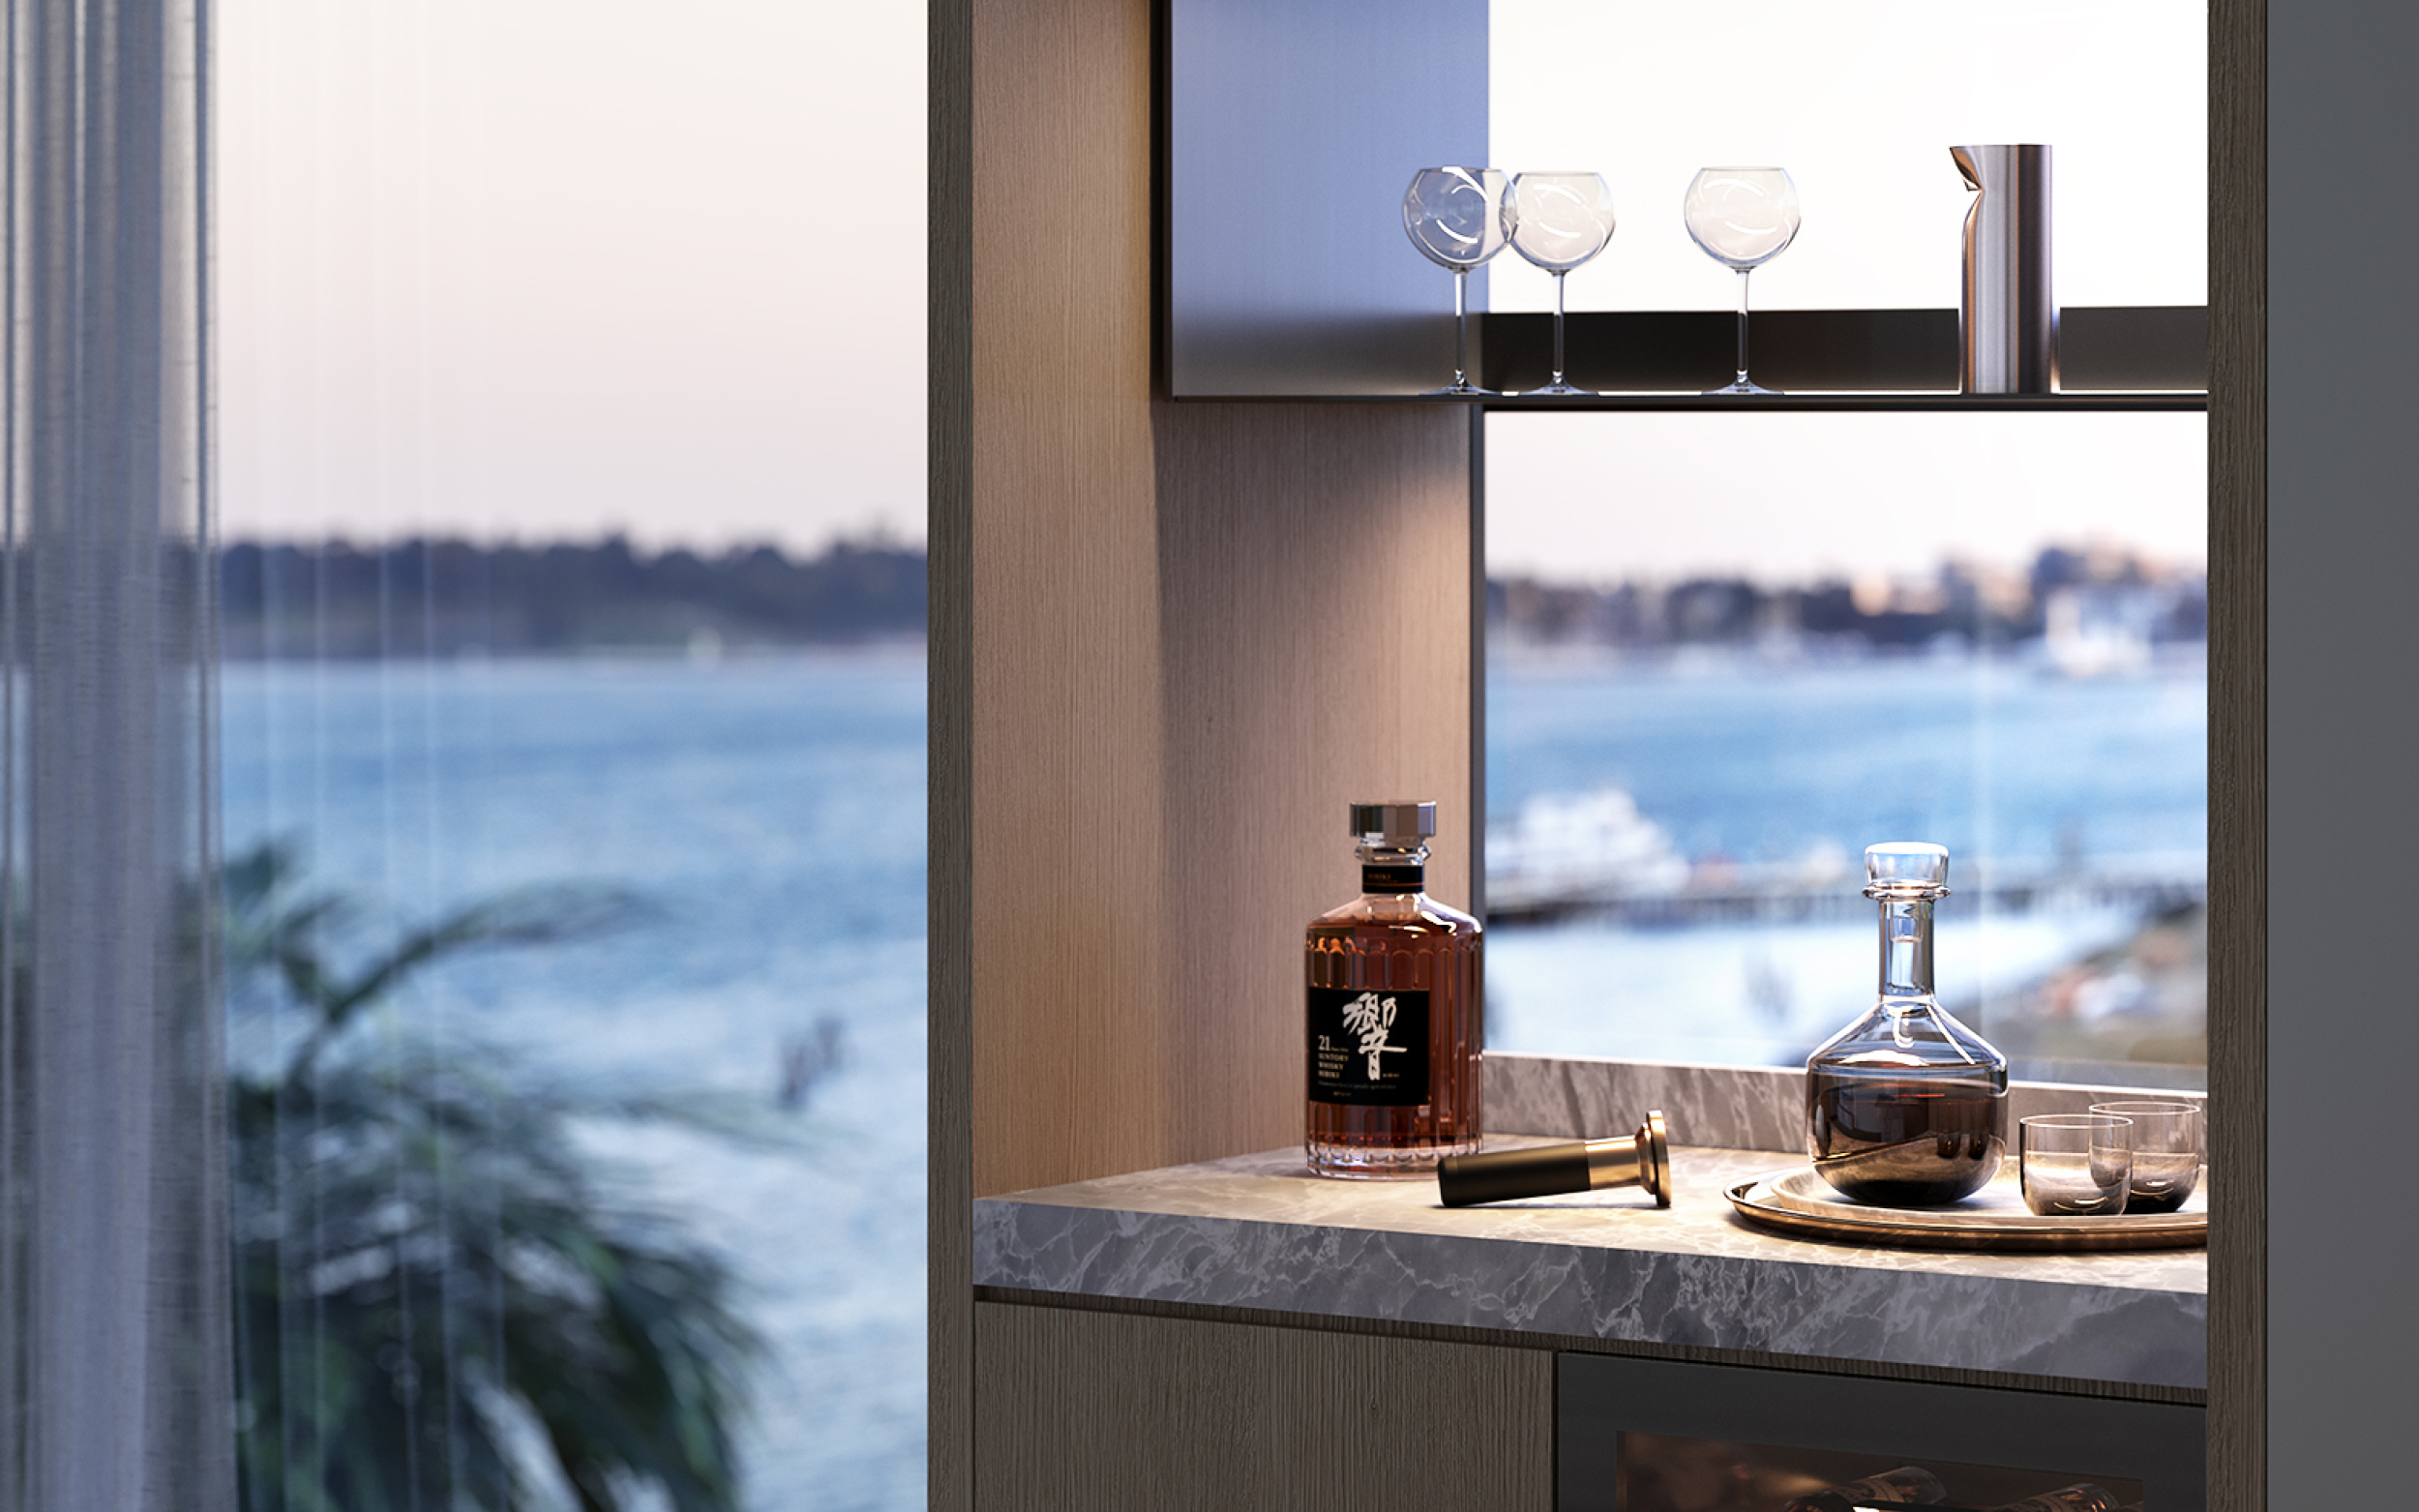 artist impression of integrated bar with view over Corio Bay from the window